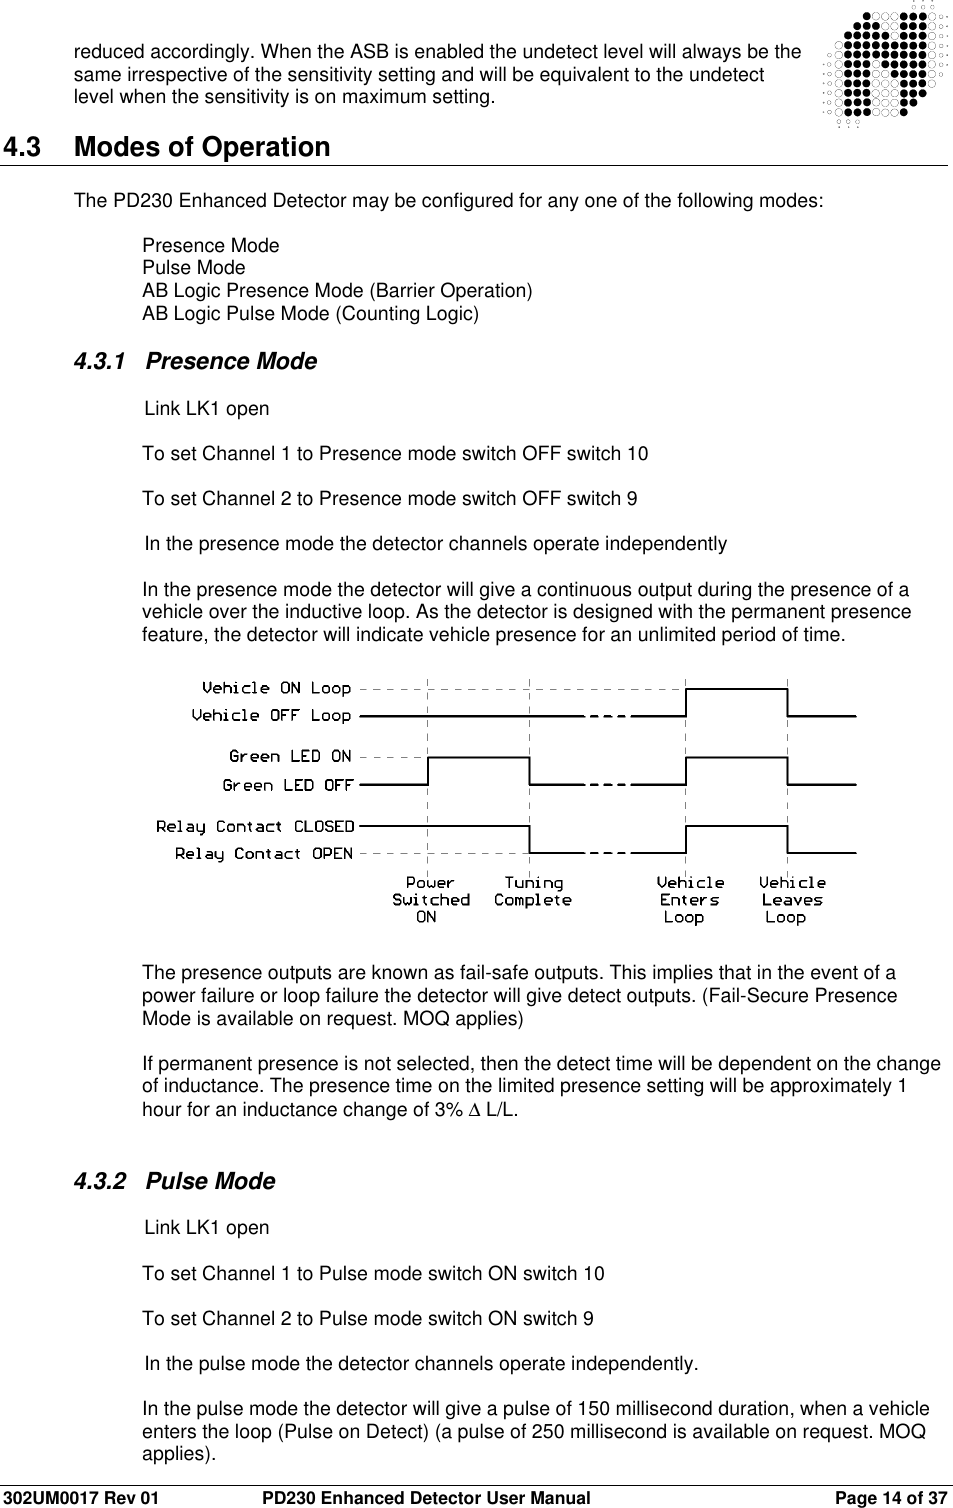  302UM0017 Rev 01  PD230 Enhanced Detector User Manual   Page 14 of 37 reduced accordingly. When the ASB is enabled the undetect level will always be the same irrespective of the sensitivity setting and will be equivalent to the undetect level when the sensitivity is on maximum setting.  4.3  Modes of Operation  The PD230 Enhanced Detector may be configured for any one of the following modes:  Presence Mode Pulse Mode AB Logic Presence Mode (Barrier Operation) AB Logic Pulse Mode (Counting Logic)  4.3.1  Presence Mode    Link LK1 open  To set Channel 1 to Presence mode switch OFF switch 10  To set Channel 2 to Presence mode switch OFF switch 9    In the presence mode the detector channels operate independently  In the presence mode the detector will give a continuous output during the presence of a vehicle over the inductive loop. As the detector is designed with the permanent presence feature, the detector will indicate vehicle presence for an unlimited period of time.                The presence outputs are known as fail-safe outputs. This implies that in the event of a power failure or loop failure the detector will give detect outputs. (Fail-Secure Presence Mode is available on request. MOQ applies)  If permanent presence is not selected, then the detect time will be dependent on the change of inductance. The presence time on the limited presence setting will be approximately 1 hour for an inductance change of 3% ∆ L/L.   4.3.2  Pulse Mode    Link LK1 open  To set Channel 1 to Pulse mode switch ON switch 10  To set Channel 2 to Pulse mode switch ON switch 9    In the pulse mode the detector channels operate independently.  In the pulse mode the detector will give a pulse of 150 millisecond duration, when a vehicle enters the loop (Pulse on Detect) (a pulse of 250 millisecond is available on request. MOQ applies). 